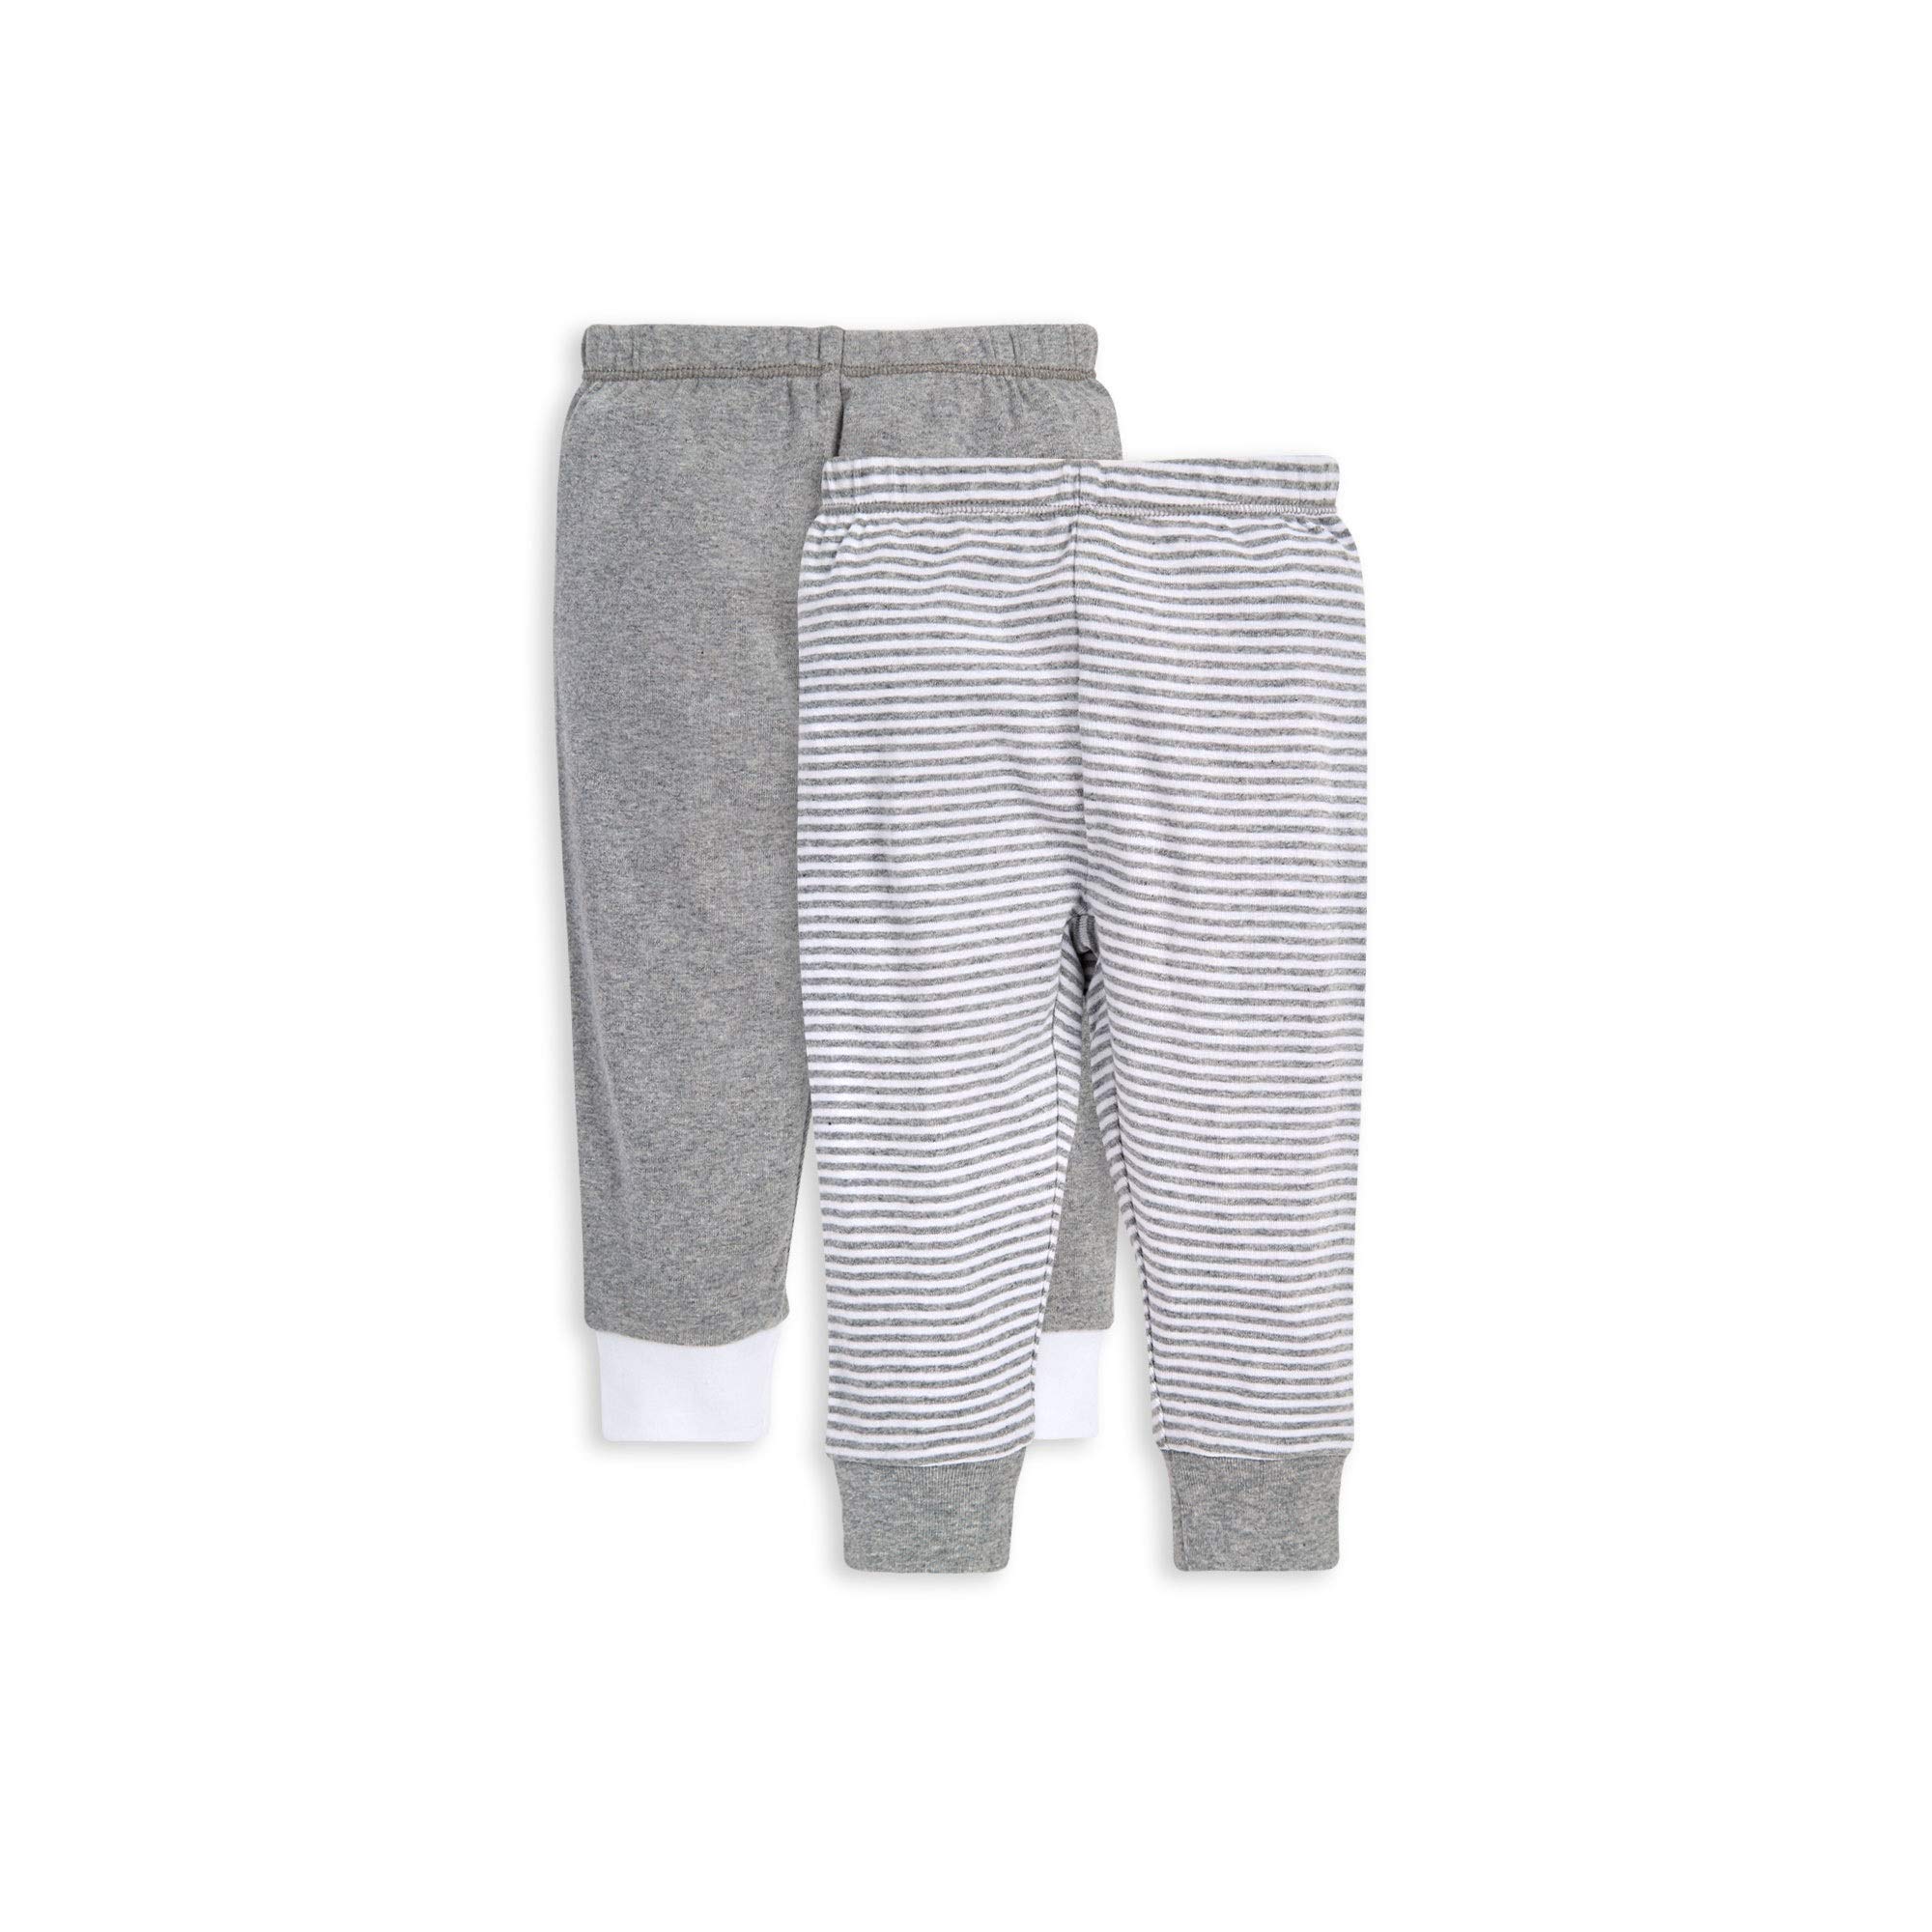 Burt's Bees Baby unisex baby Pants, of 2 Lightweight Knit Infant Bottoms, 100% Organic Cotton and Toddler Layette Set, Grey Solid/Stripes, Newborn US